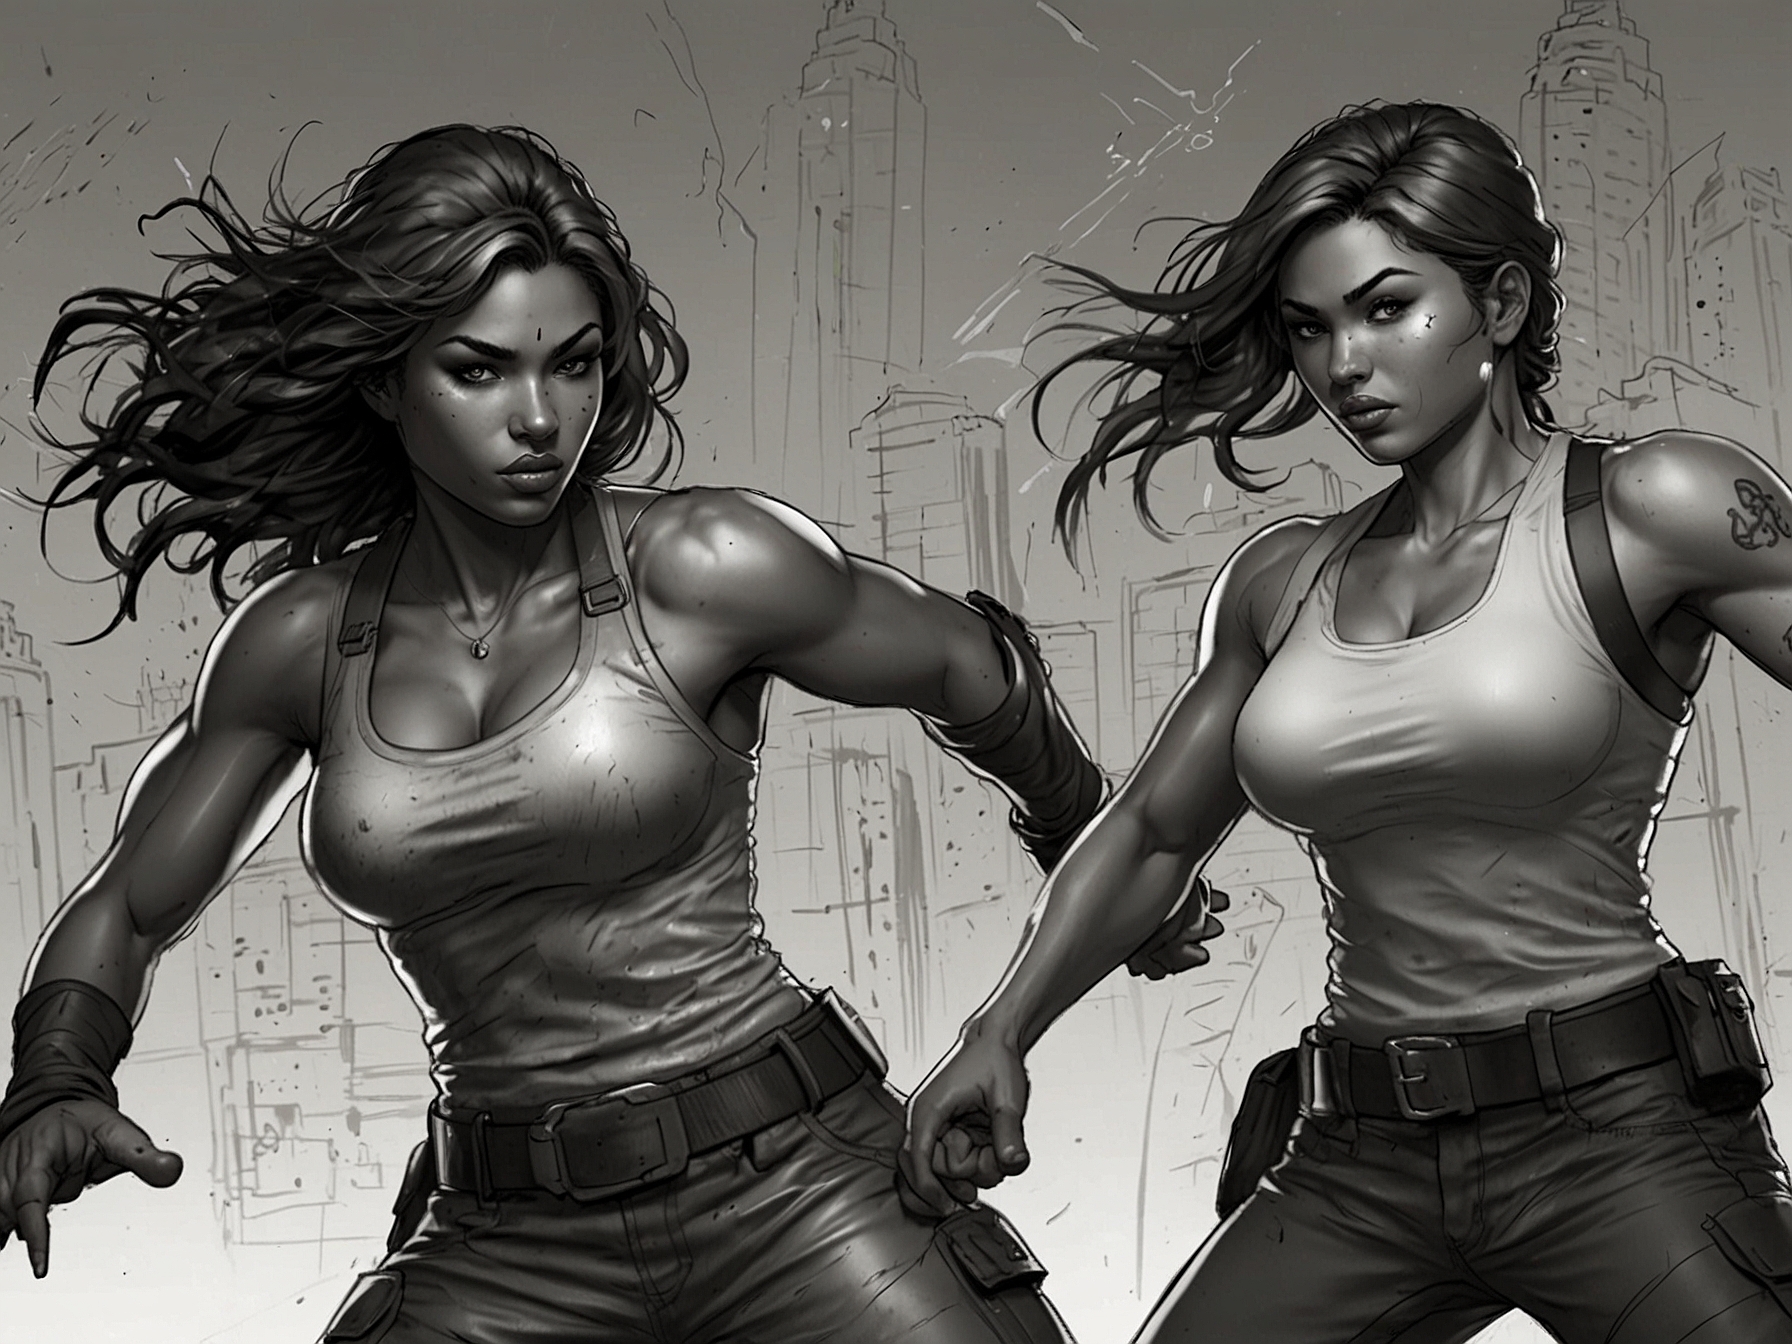 An illustration of four diverse characters from Fighting Force, showcasing their unique abilities and fighting styles, ready to take on waves of enemies in a 3D urban environment.